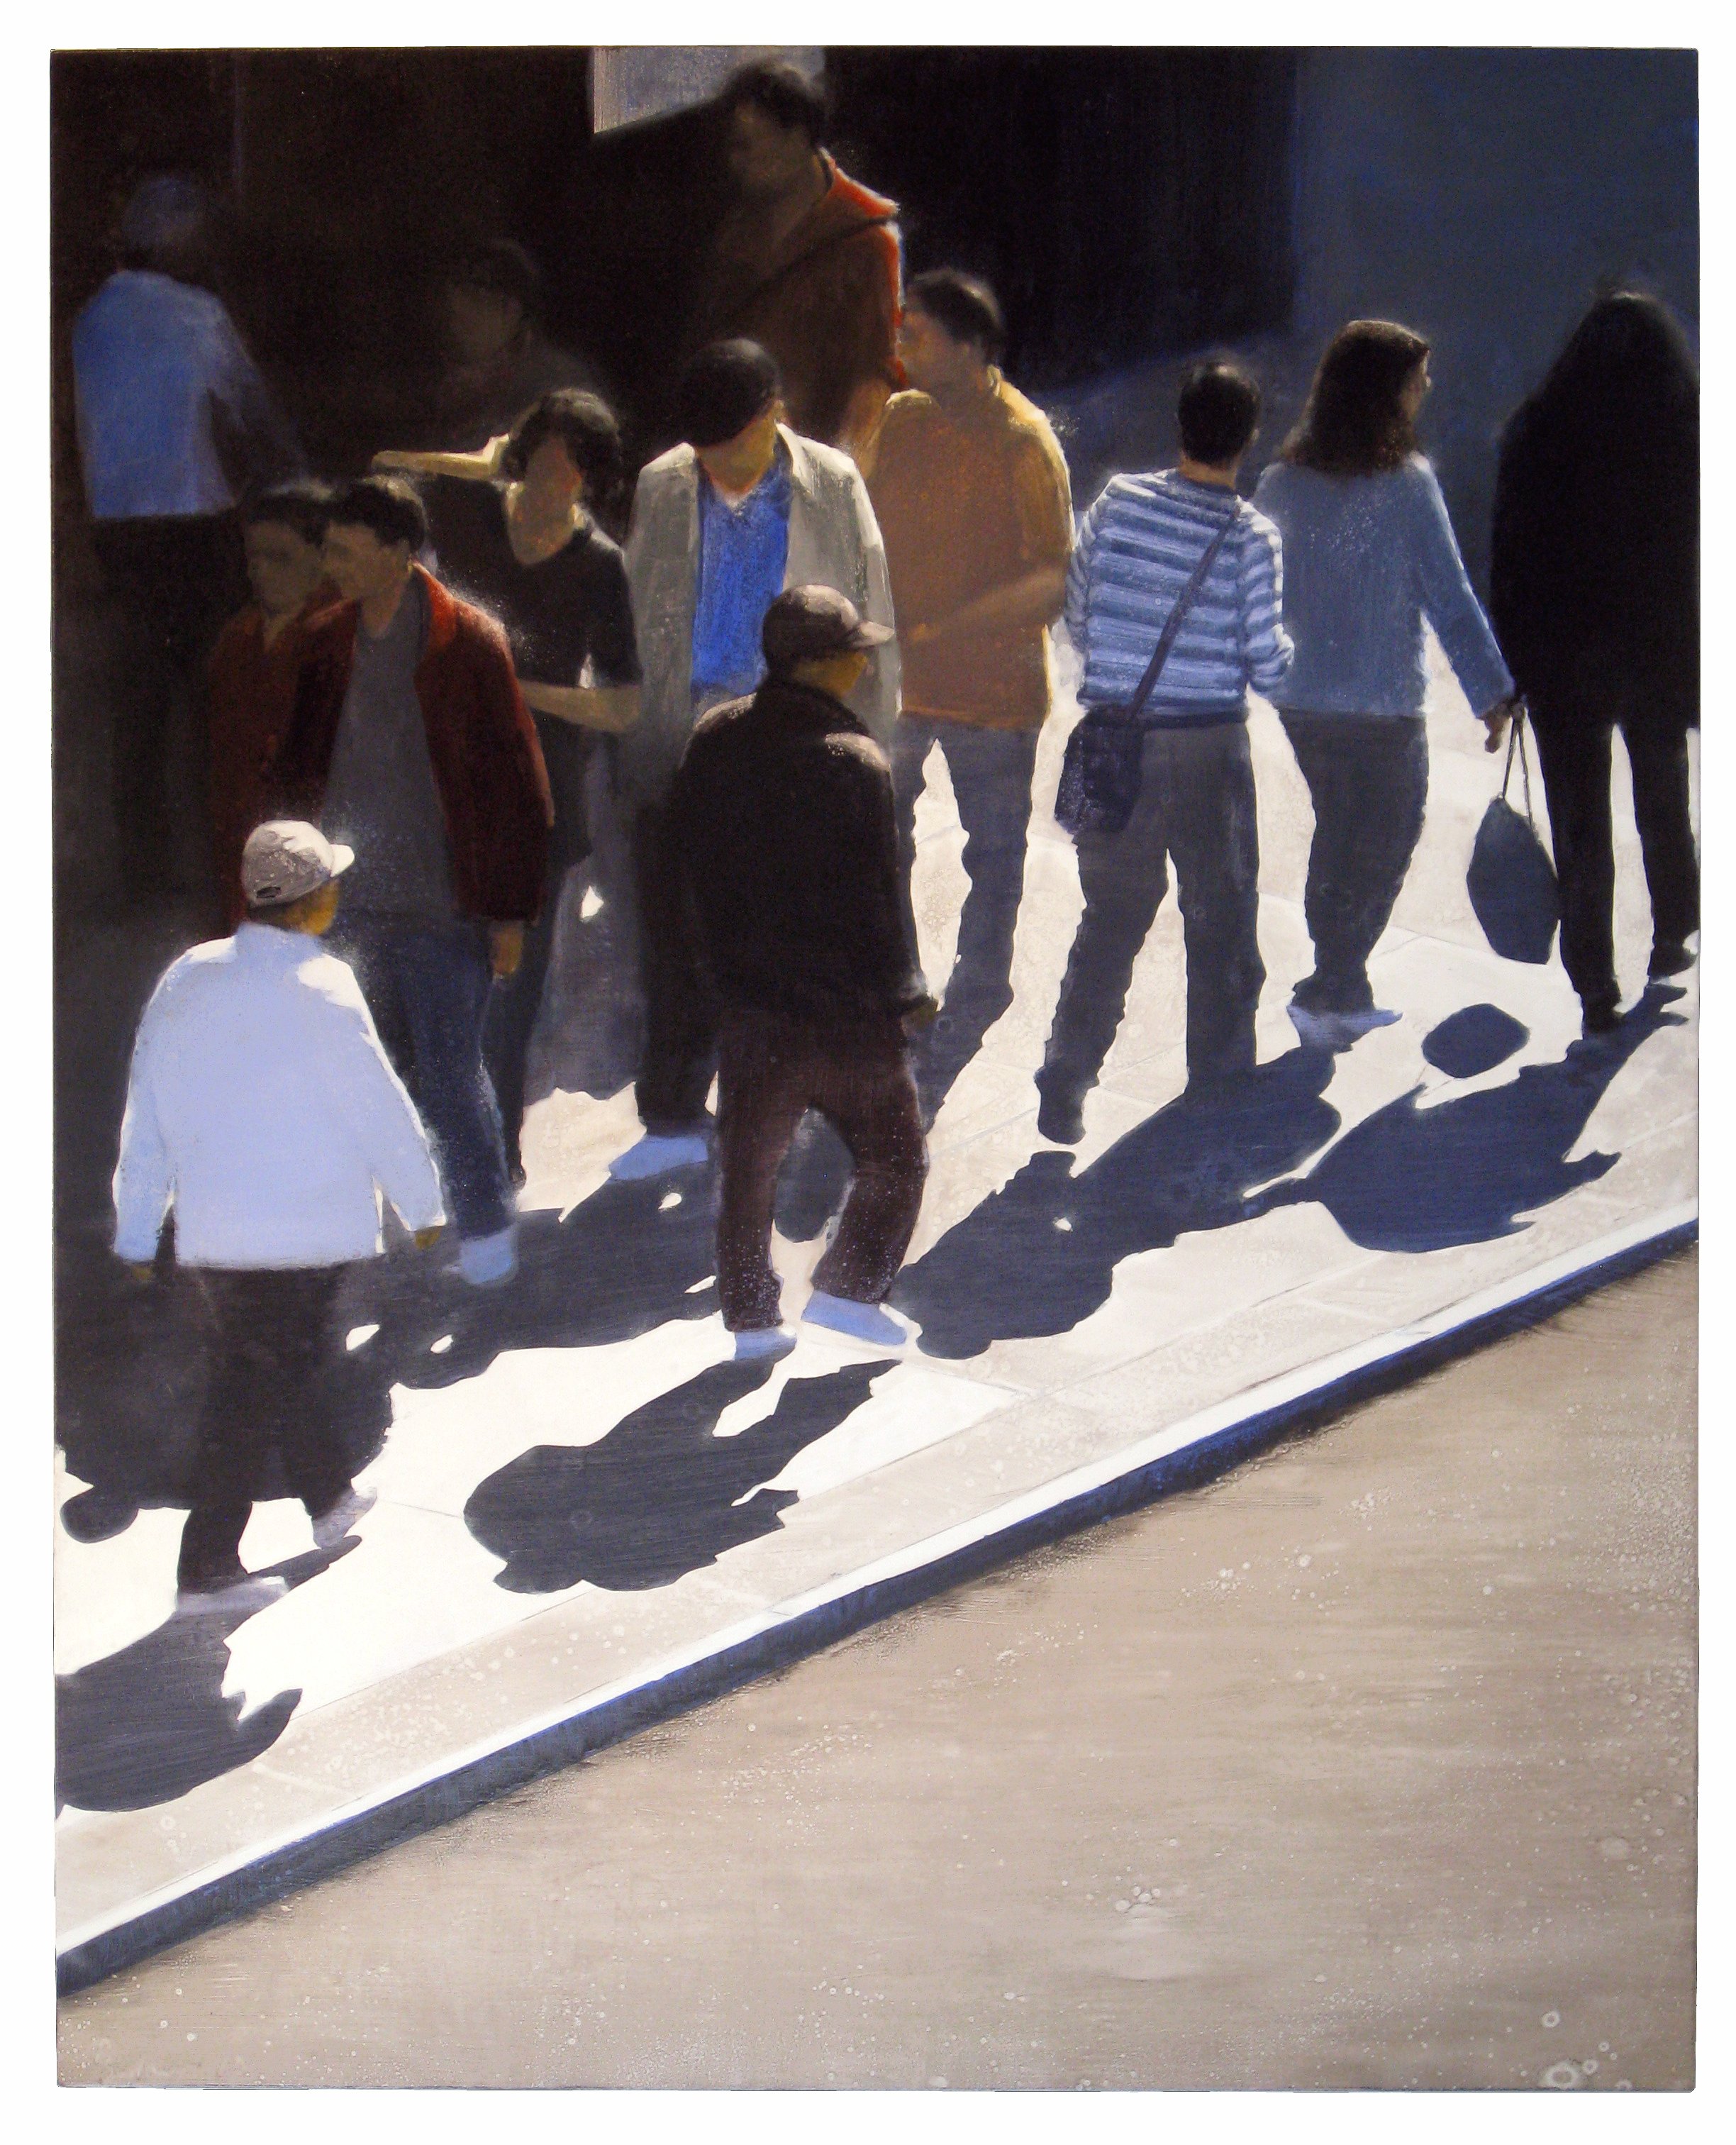  Bowery 5 72x58 inches (183x147cm) Oil on linen 2010 